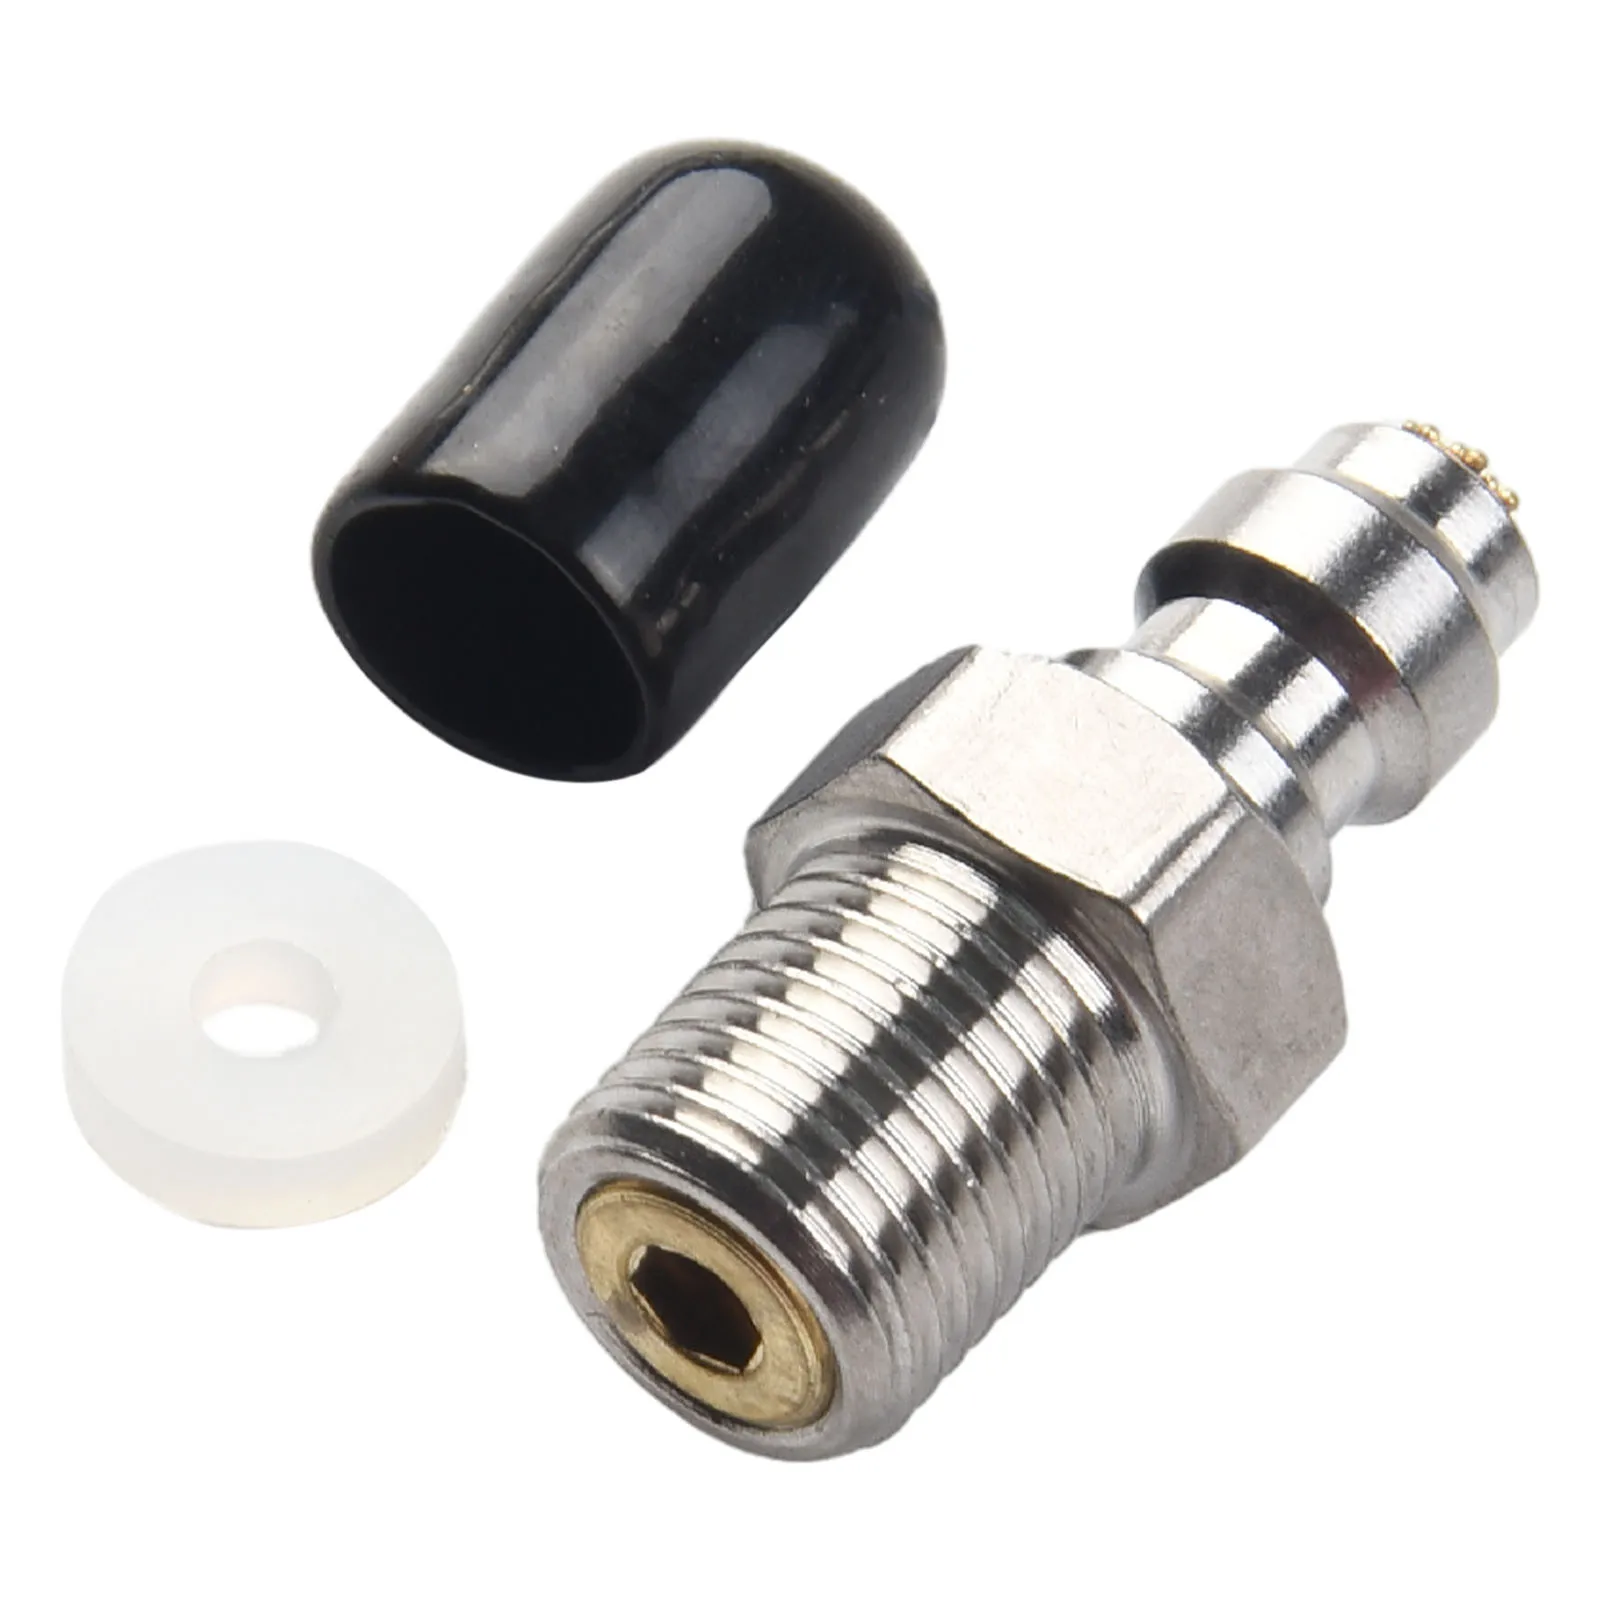 

1PC Quick Connect Check Valve Plug Adapter 8mm M10 Thread Stainless Steel Filling Joint With Filter Foster Male Connector